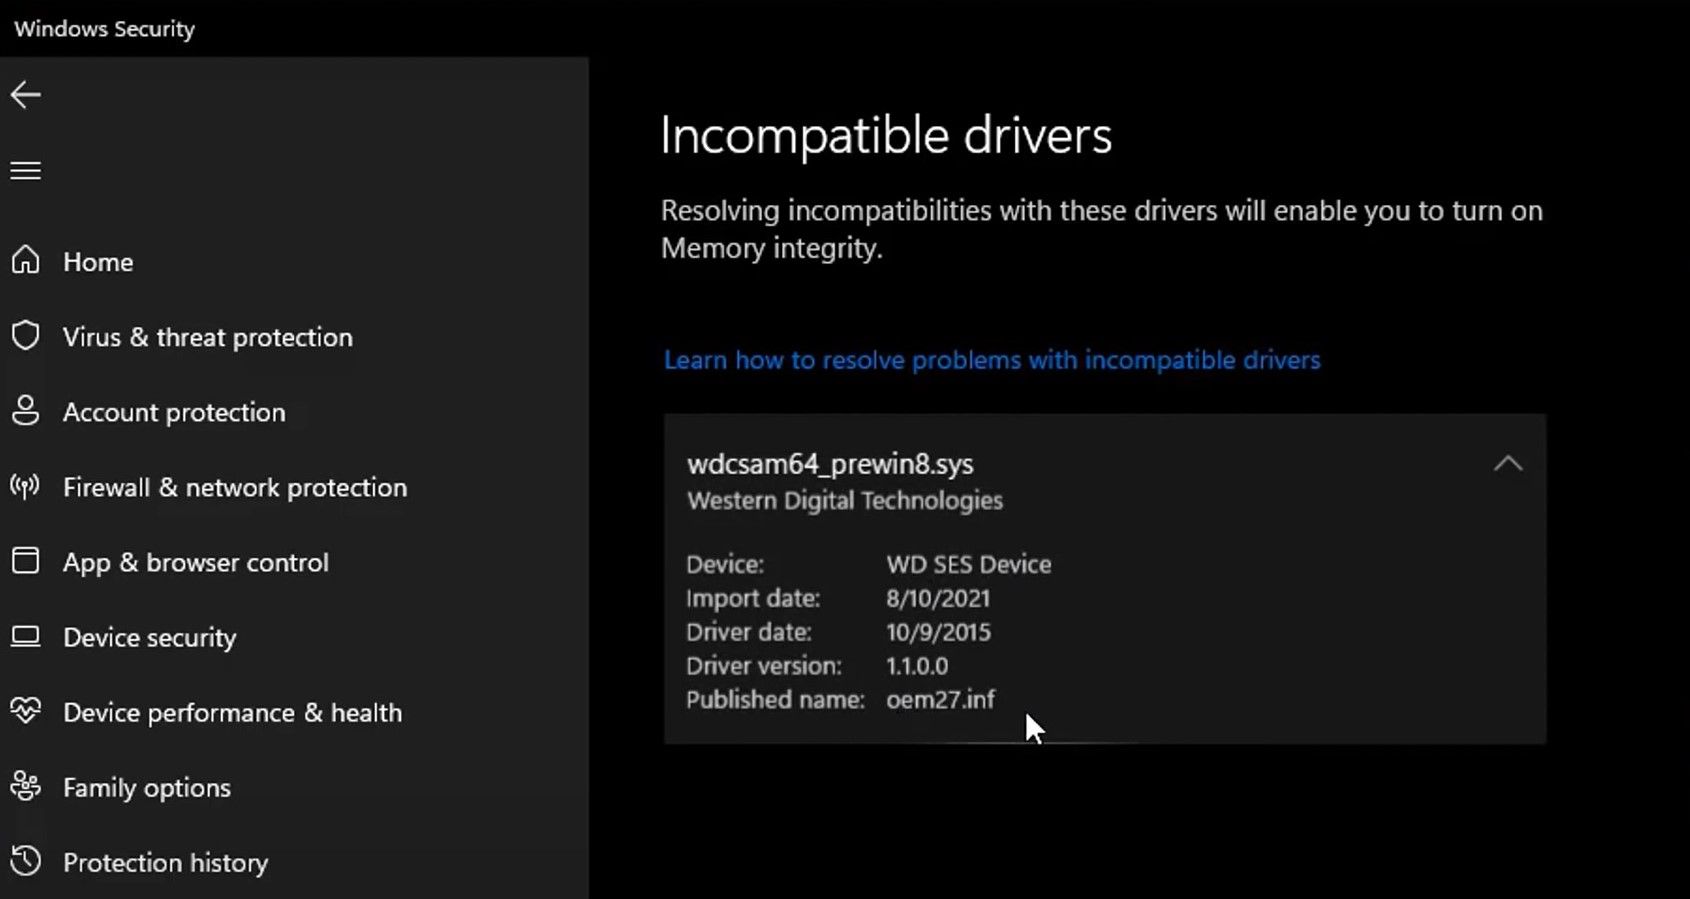 Noting Down the List of Incompatible Drivers in the Core Isolation Settings Within Windows Security App